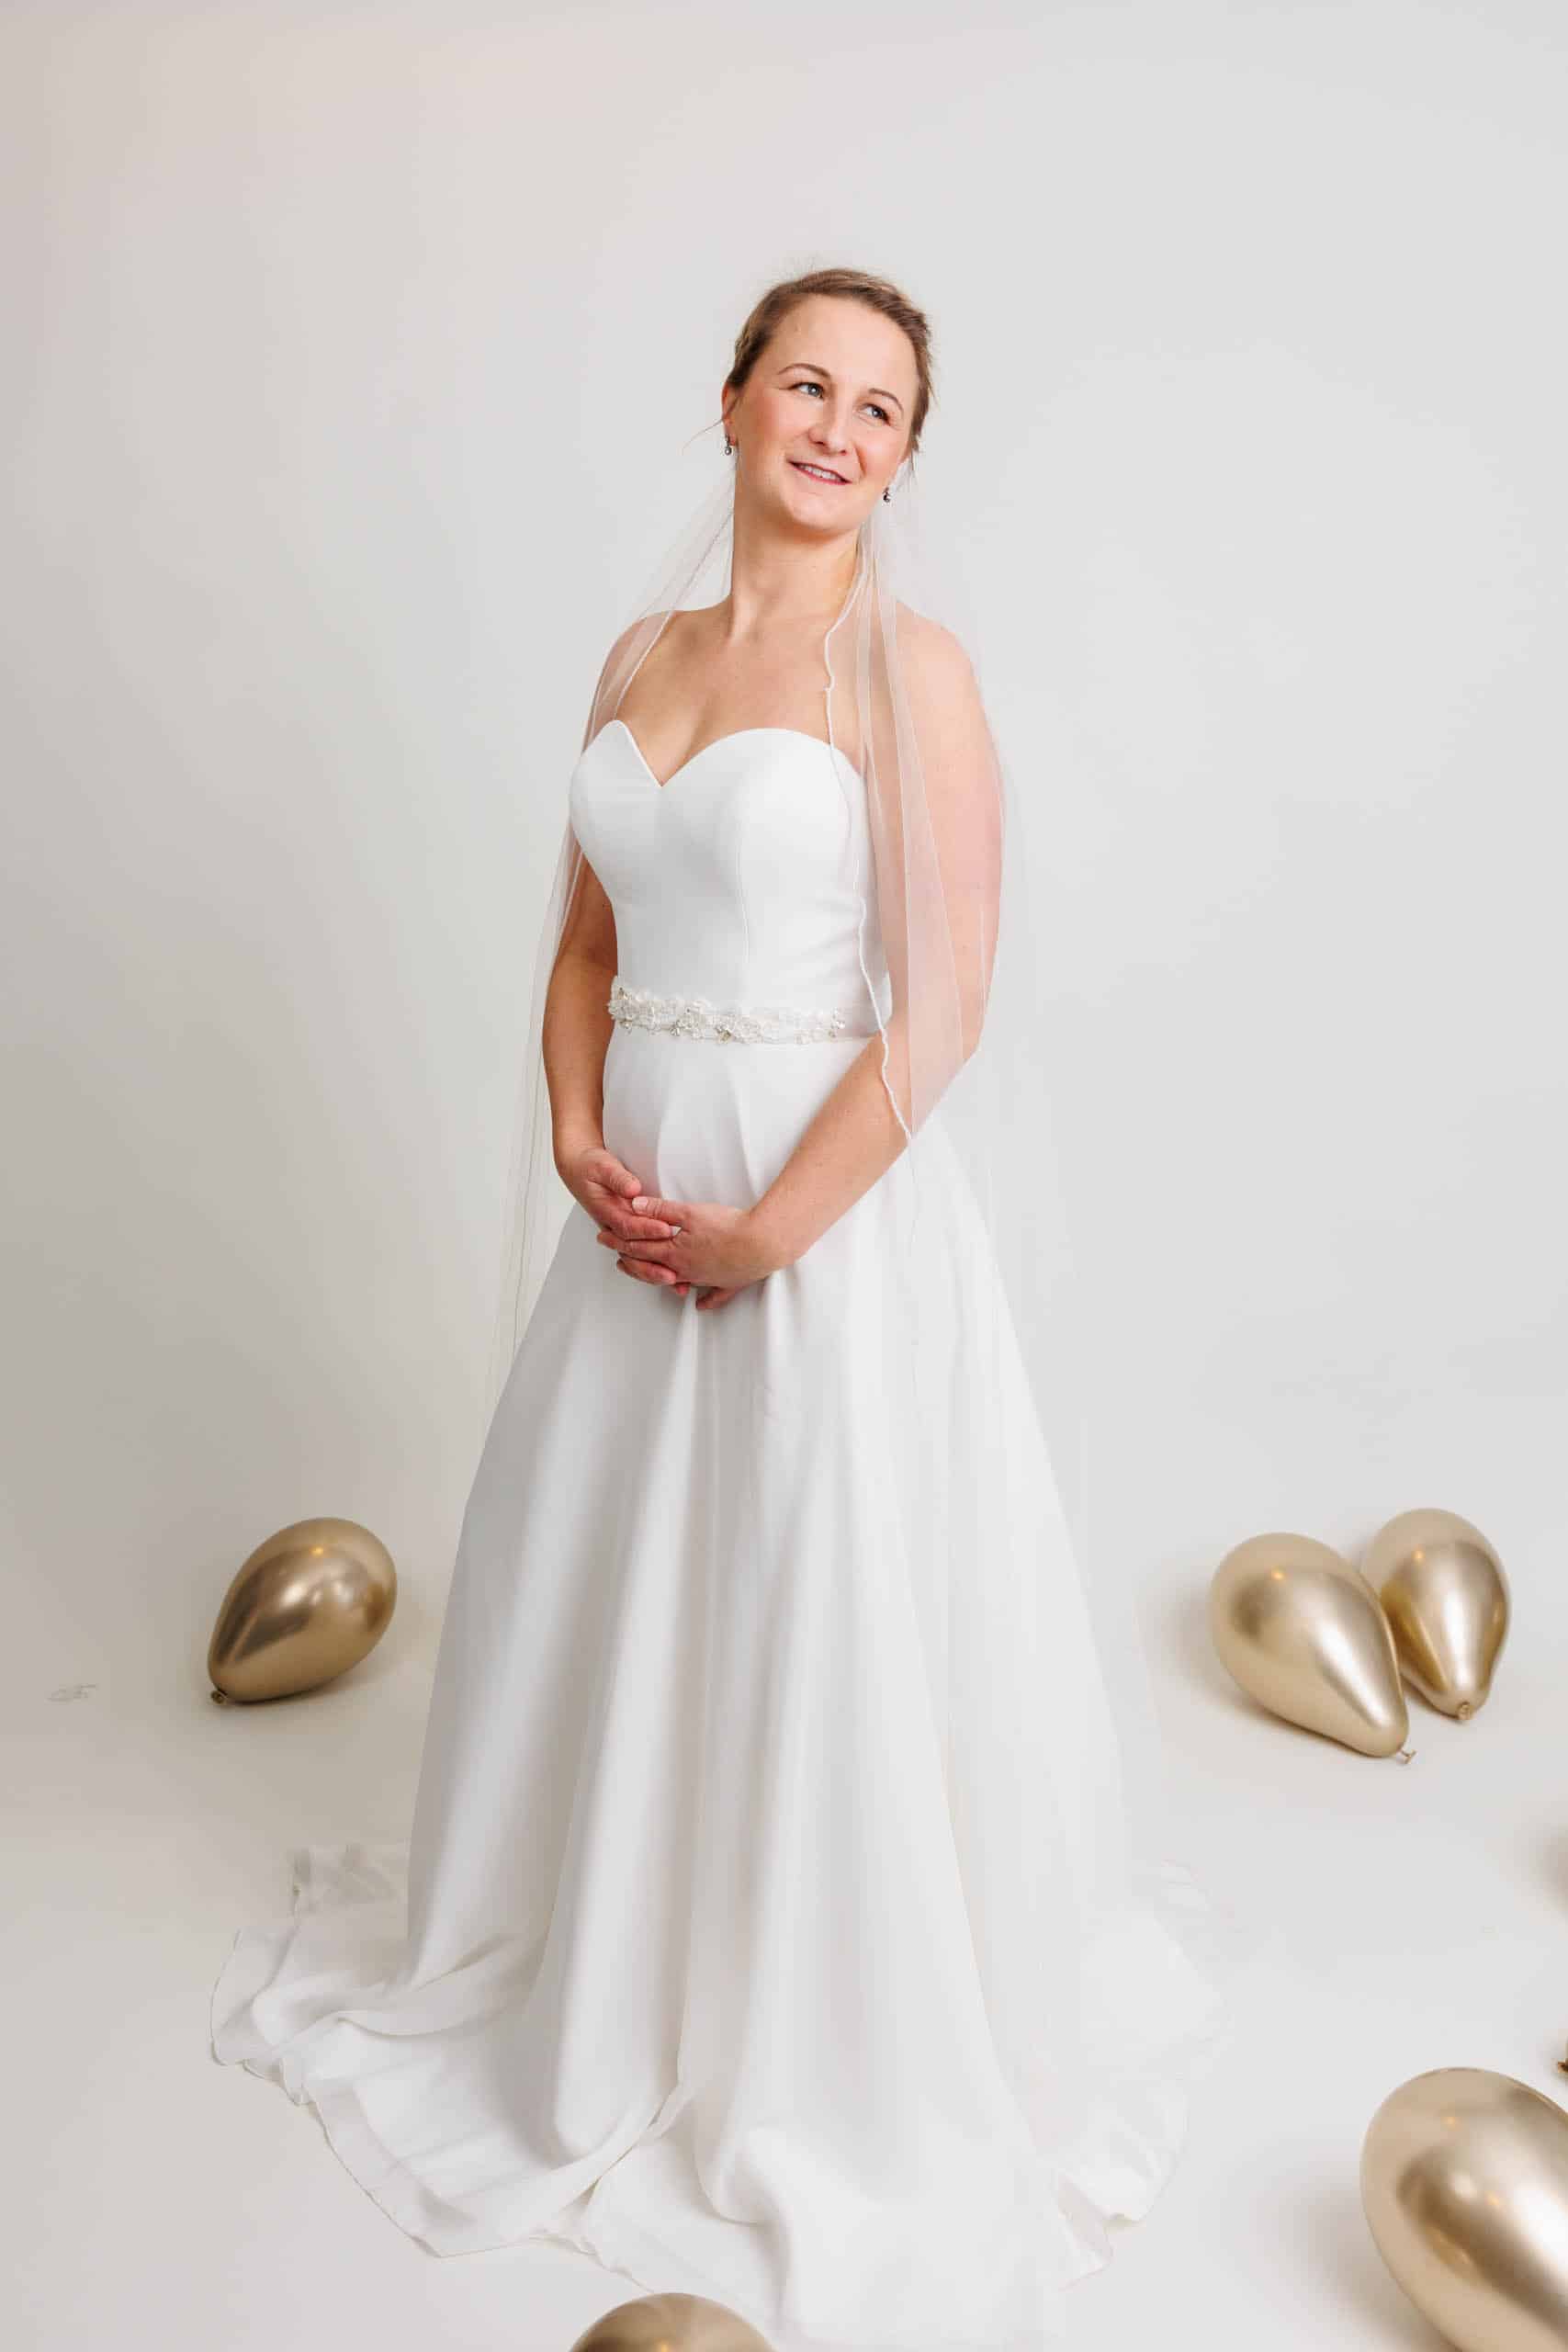 A bride wearing a white wedding dress poses in front of gold balloons while trying on wedding dresses for fun.